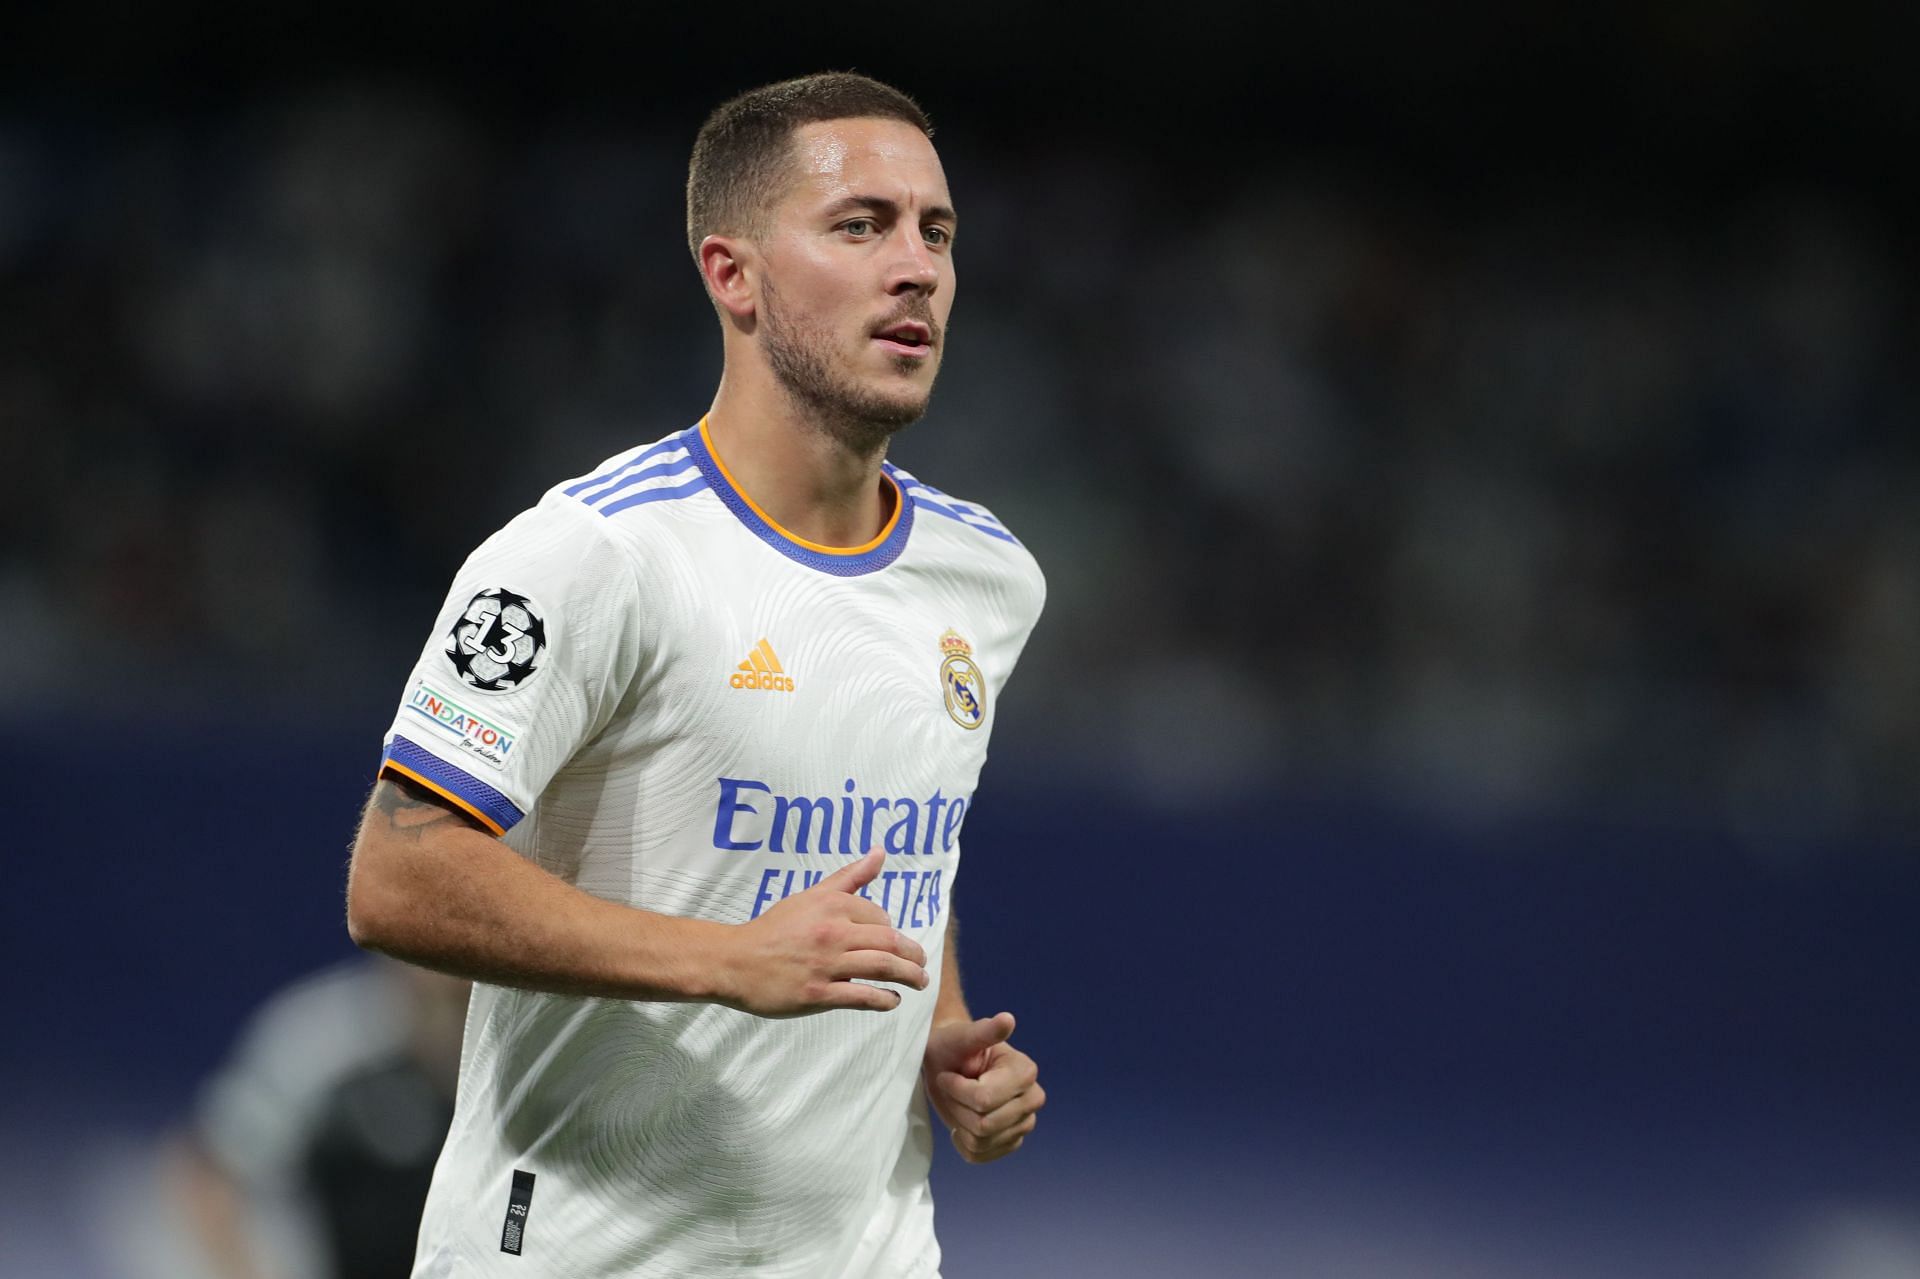 Real Madrid are interested in listening to offers for Hazard